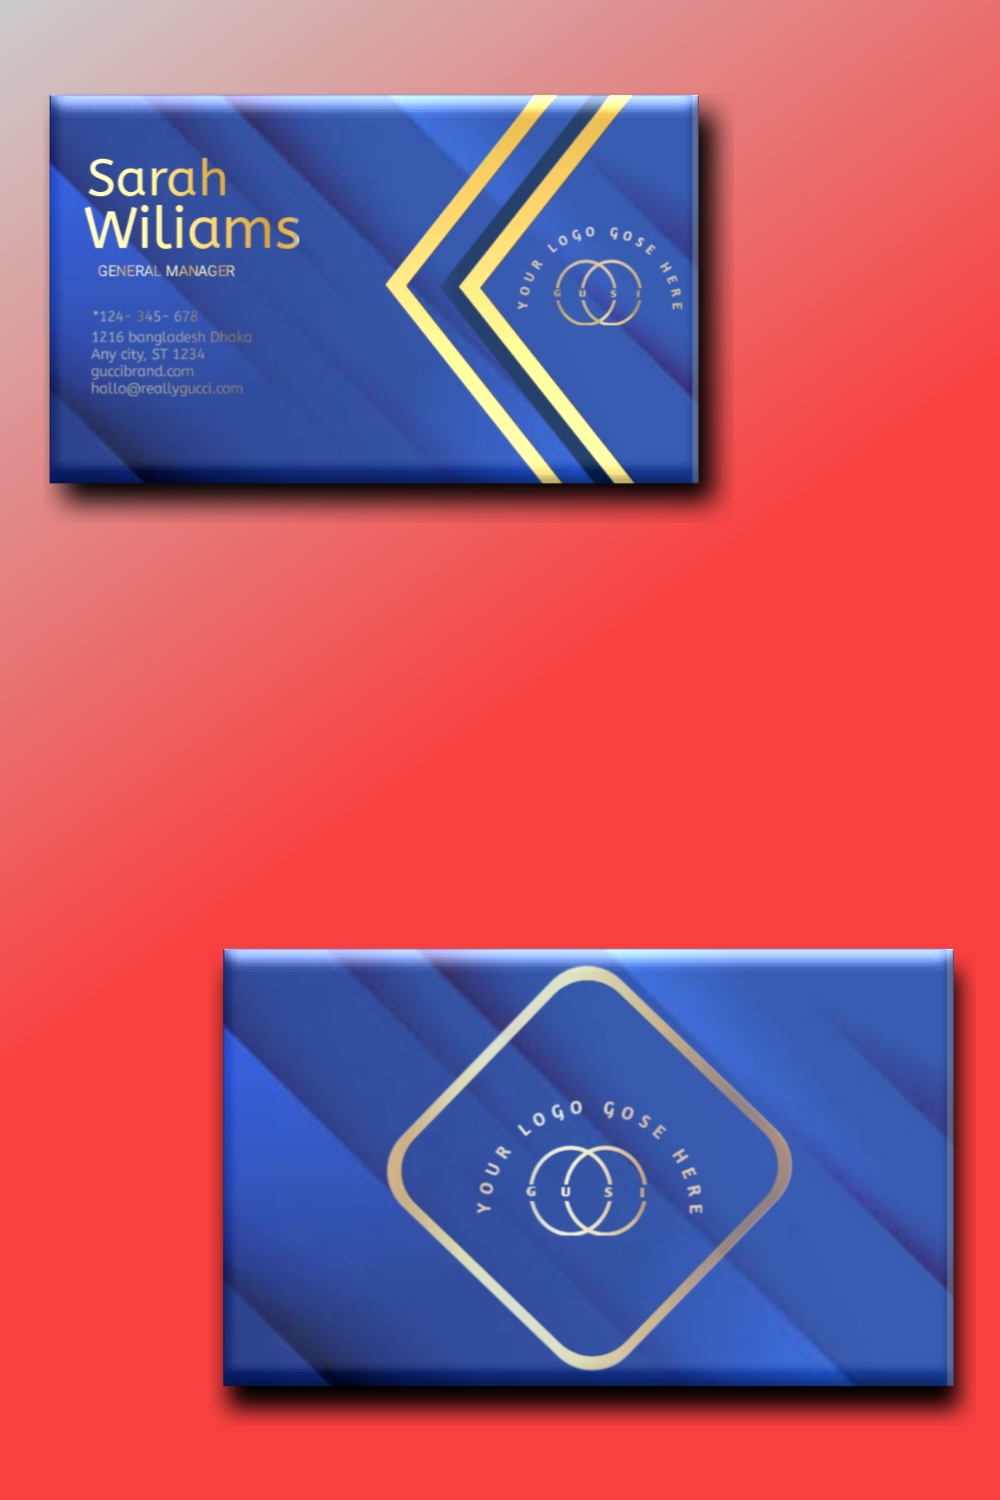 Business card design pinterest preview image.